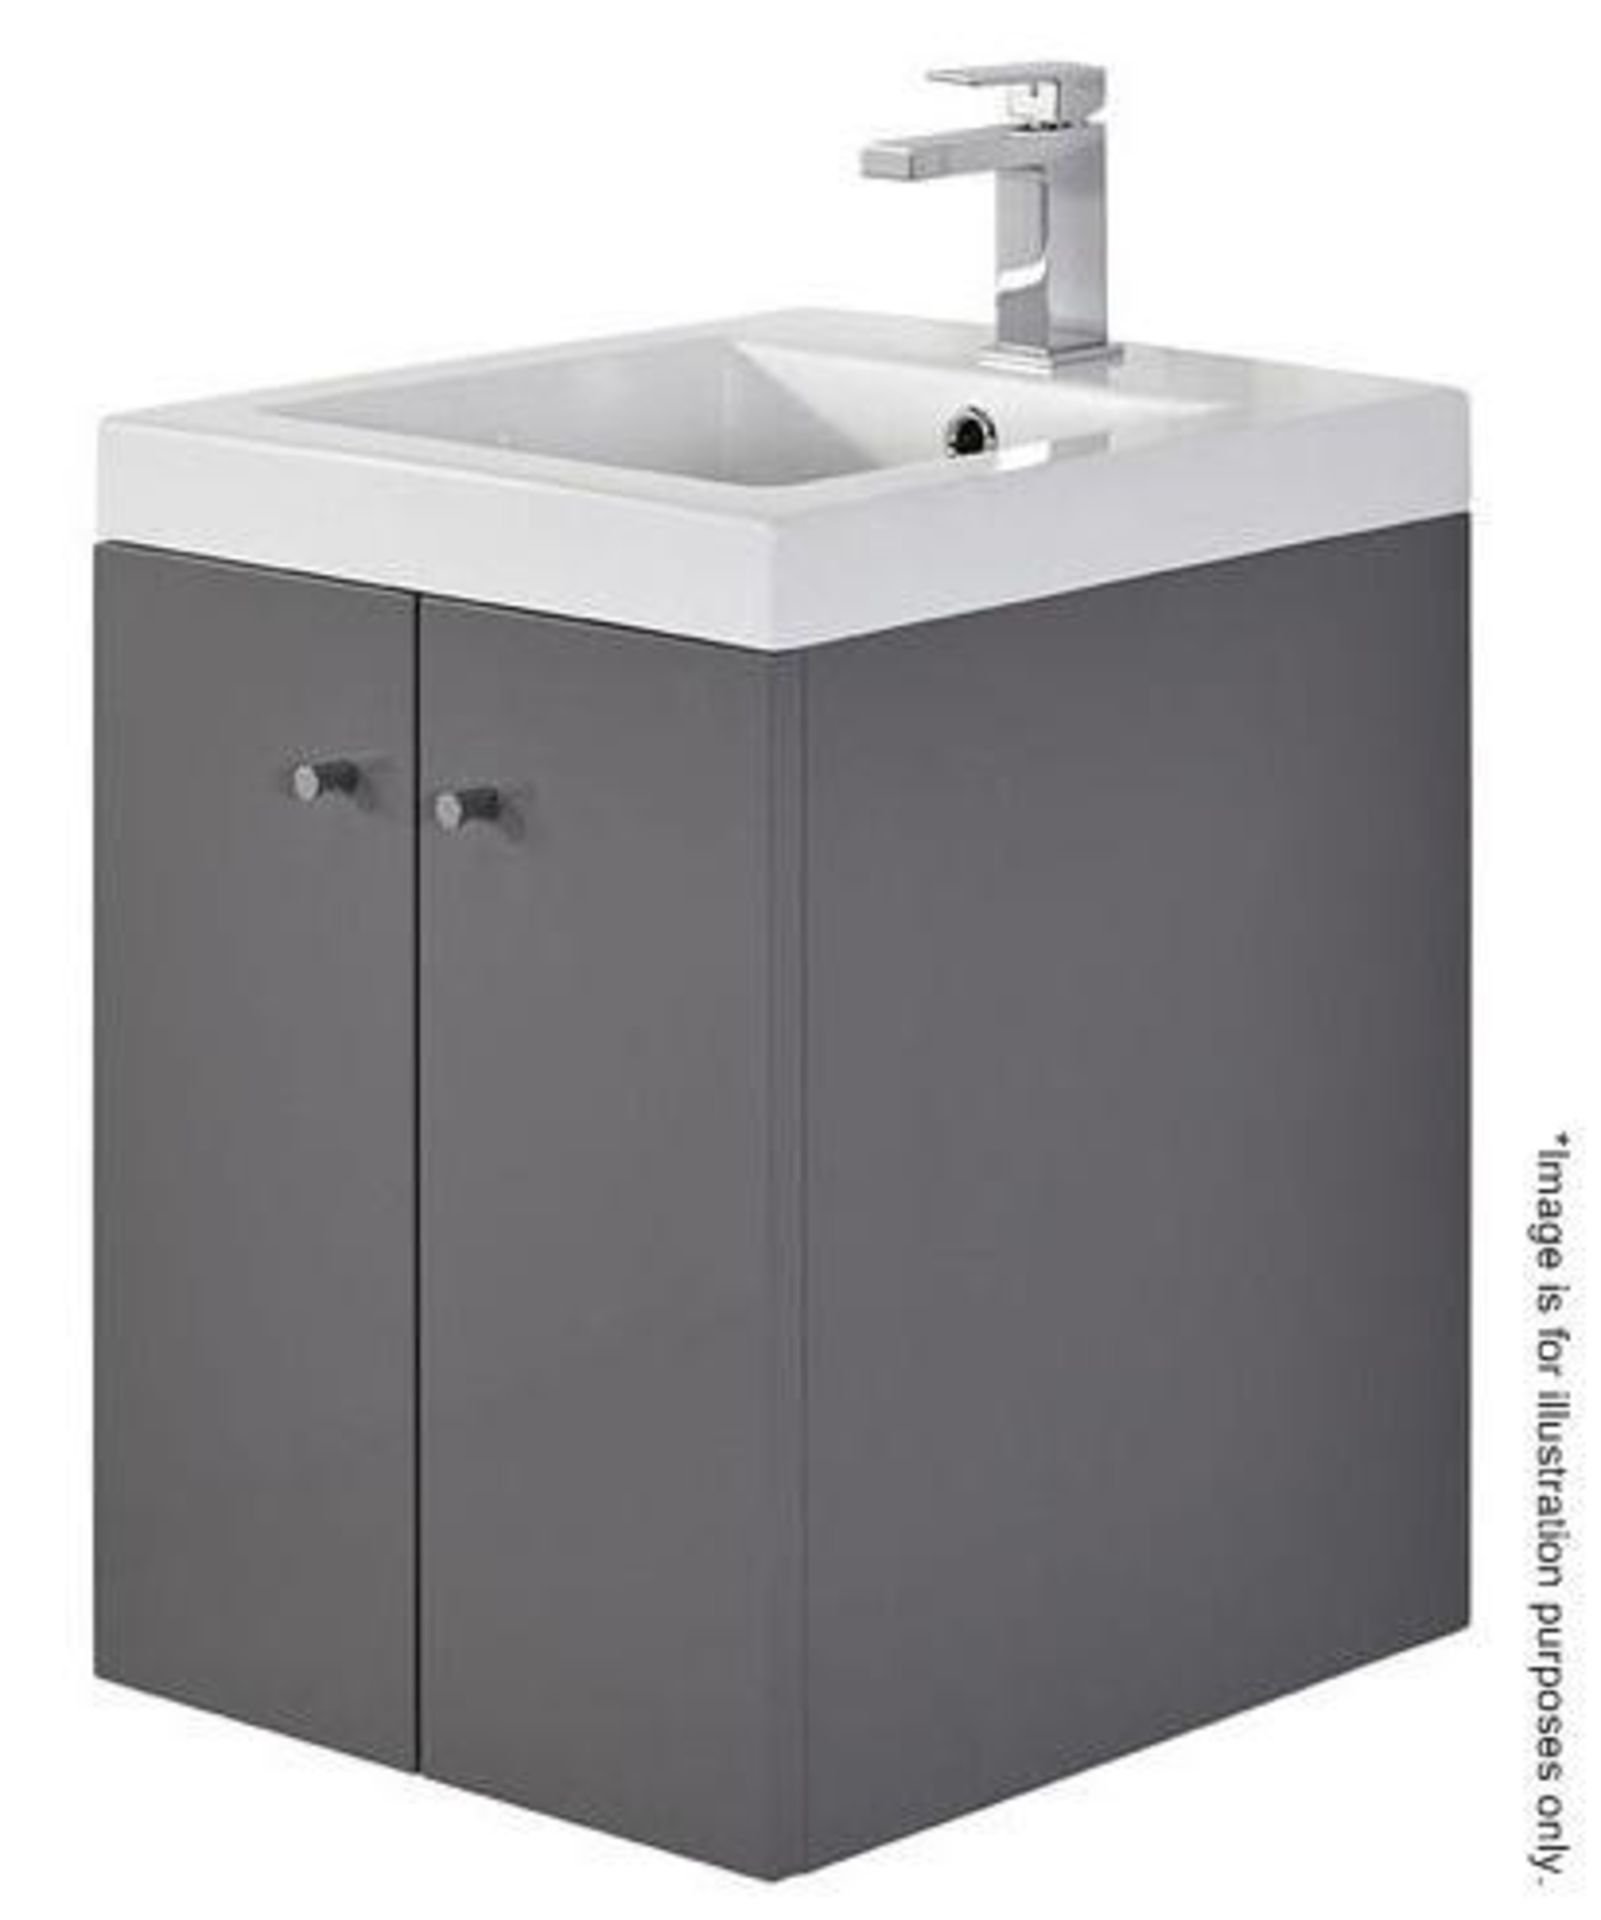 10 x Alpine Duo 400 Wall Hung Vanity Units In Gloss Grey - Brand New Boxed Stock - Dimensions: H49 x - Image 3 of 5